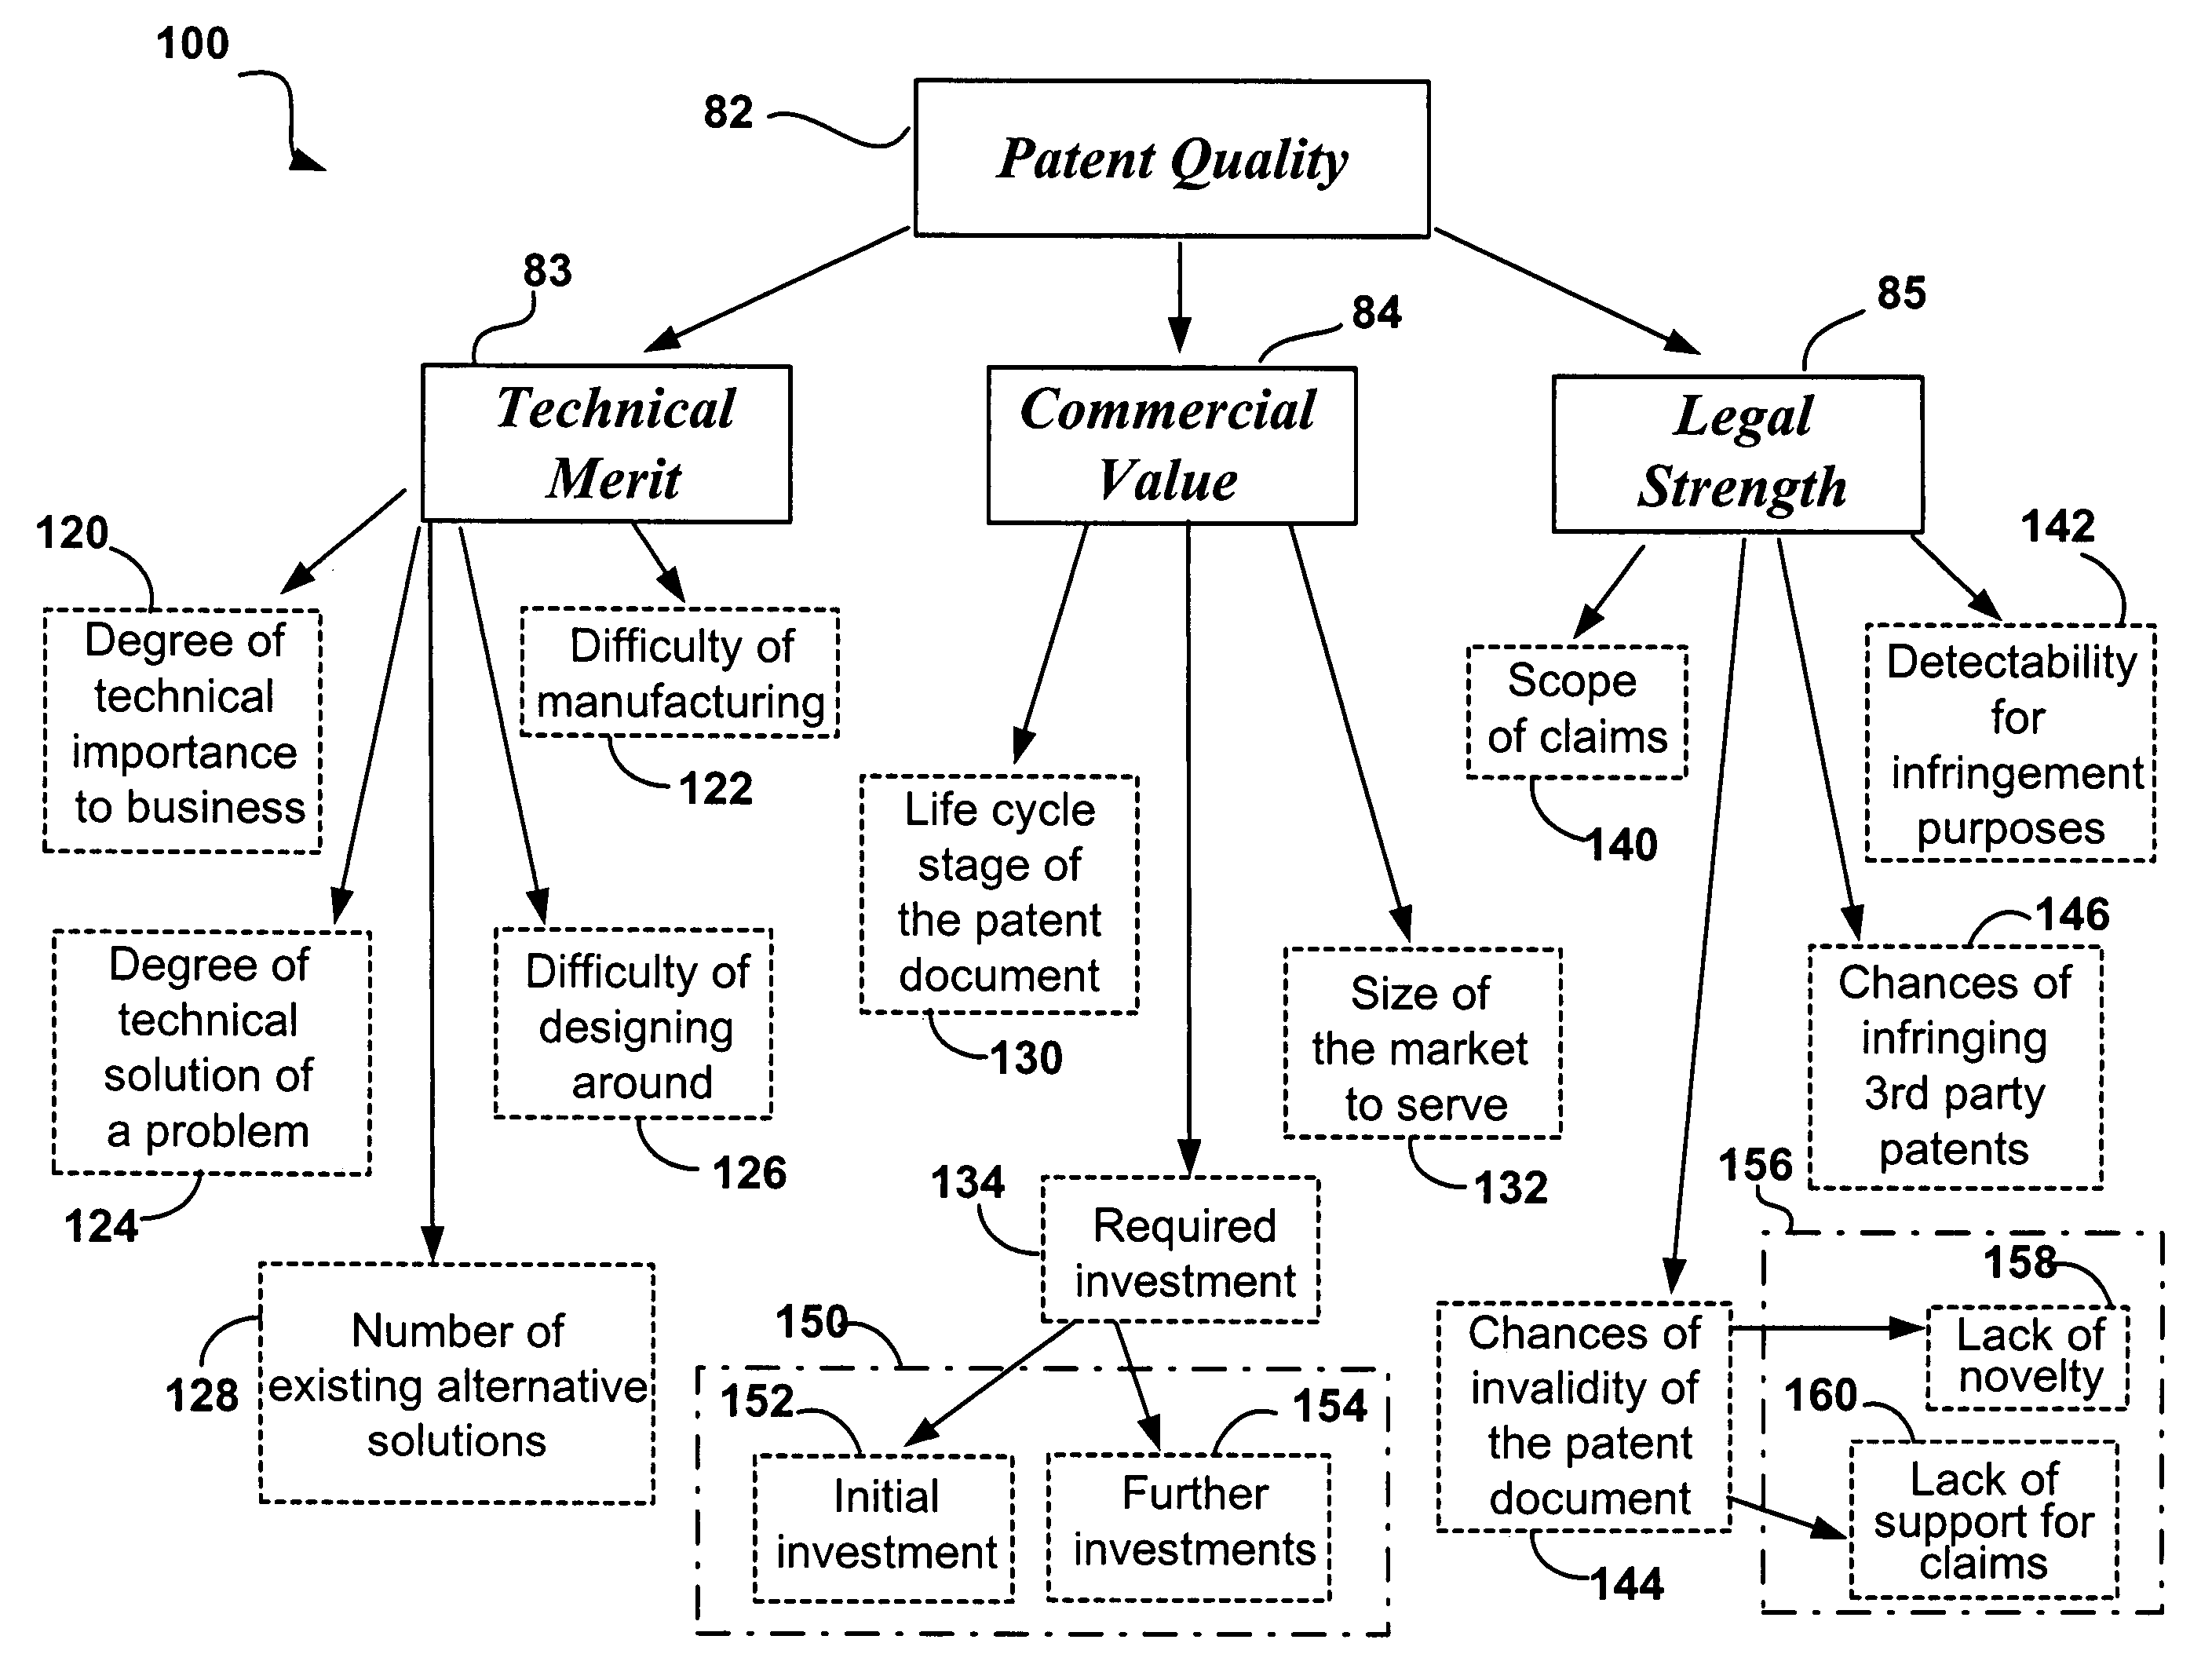 System and method for patent evaluation using artificial intelligence